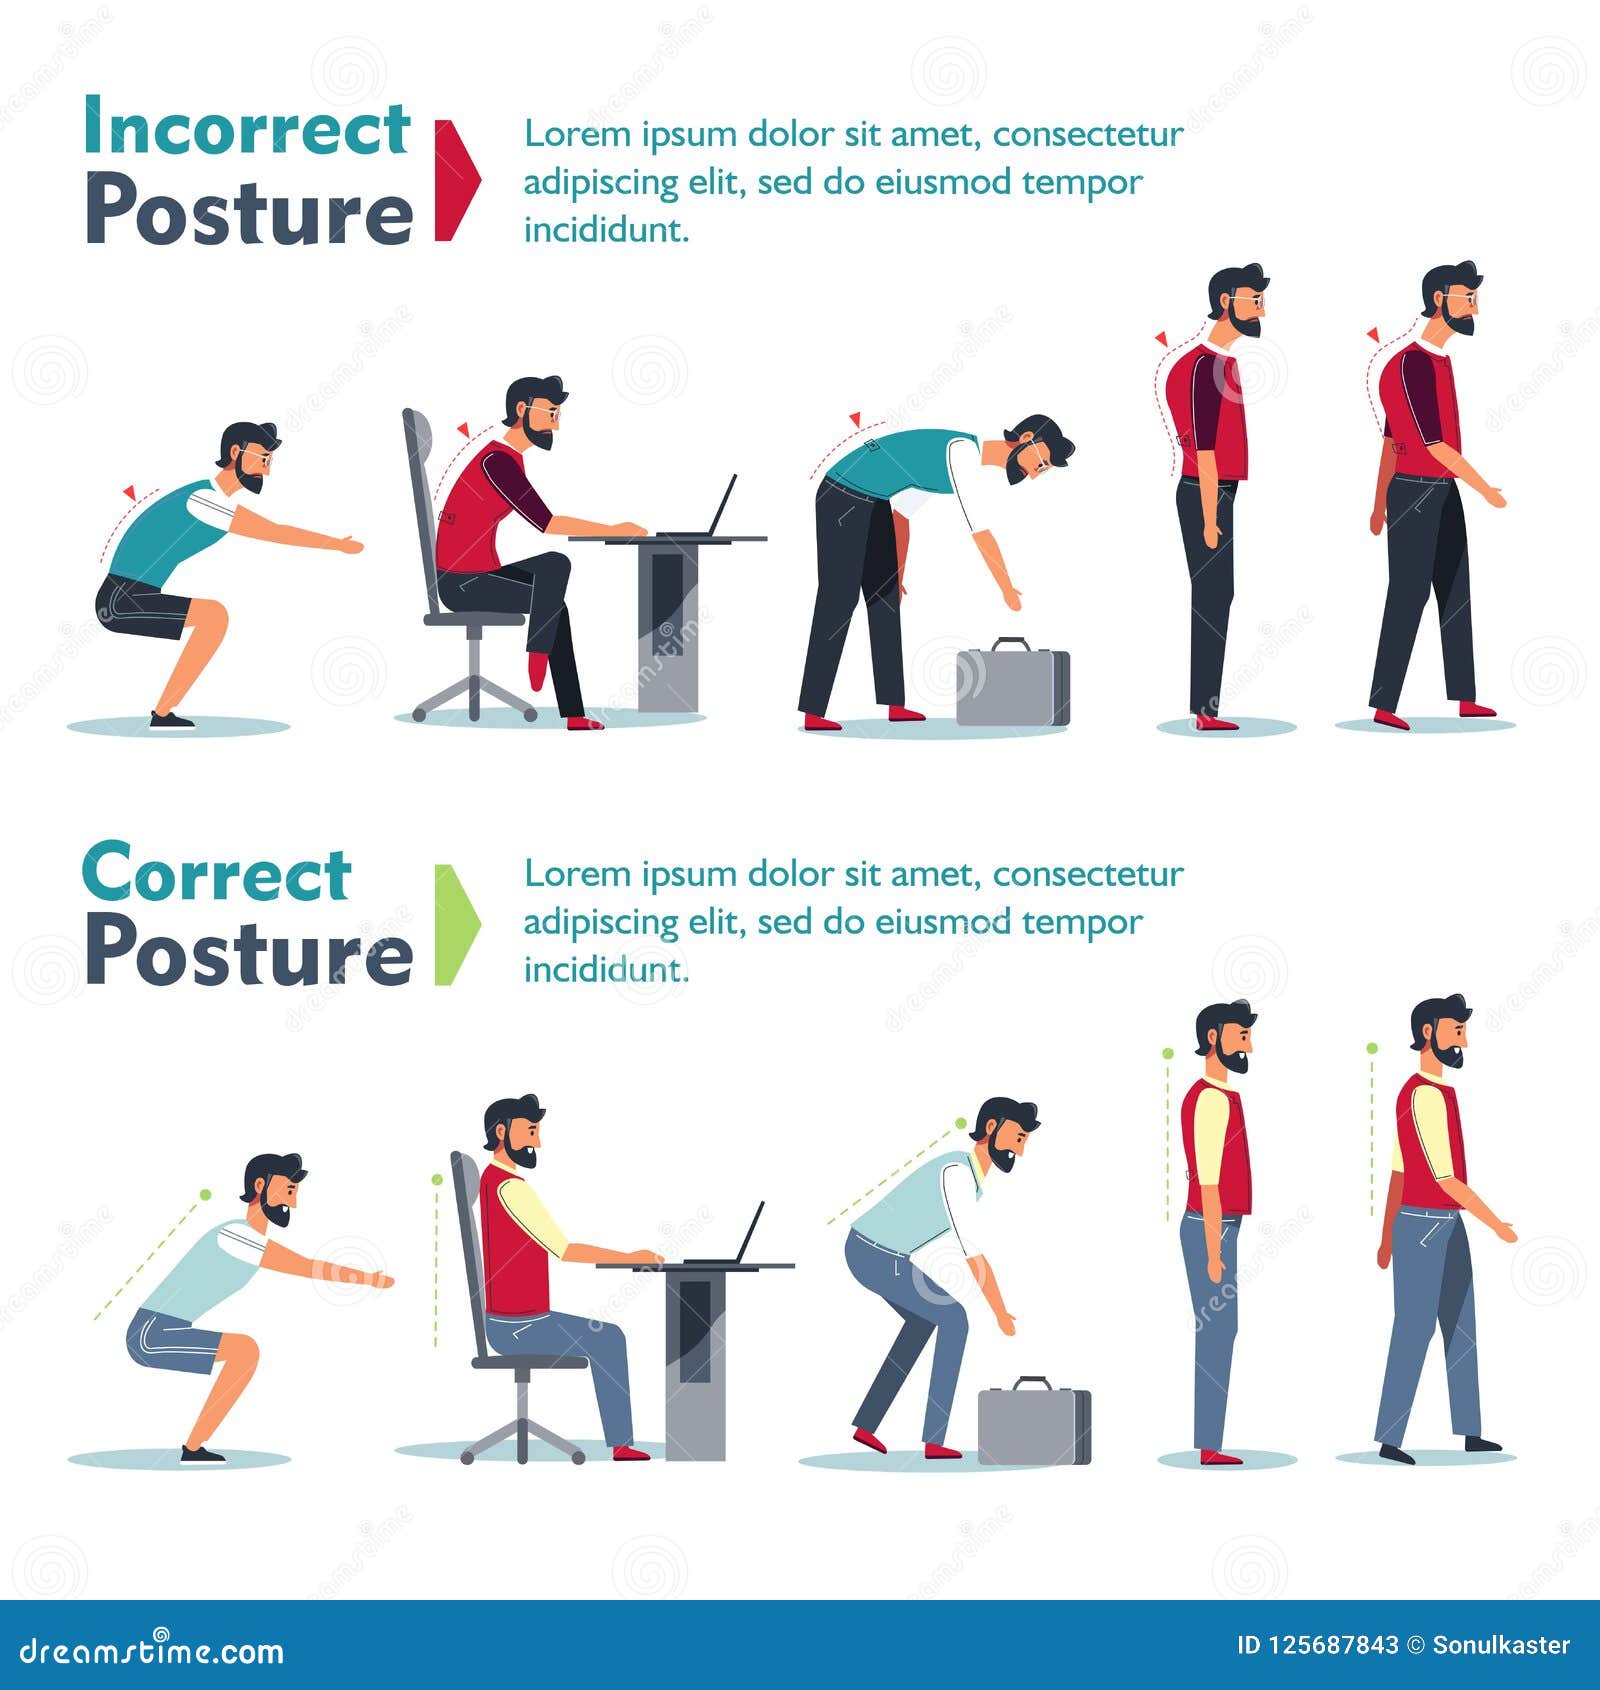 incorrect and correct posture health care poster set 